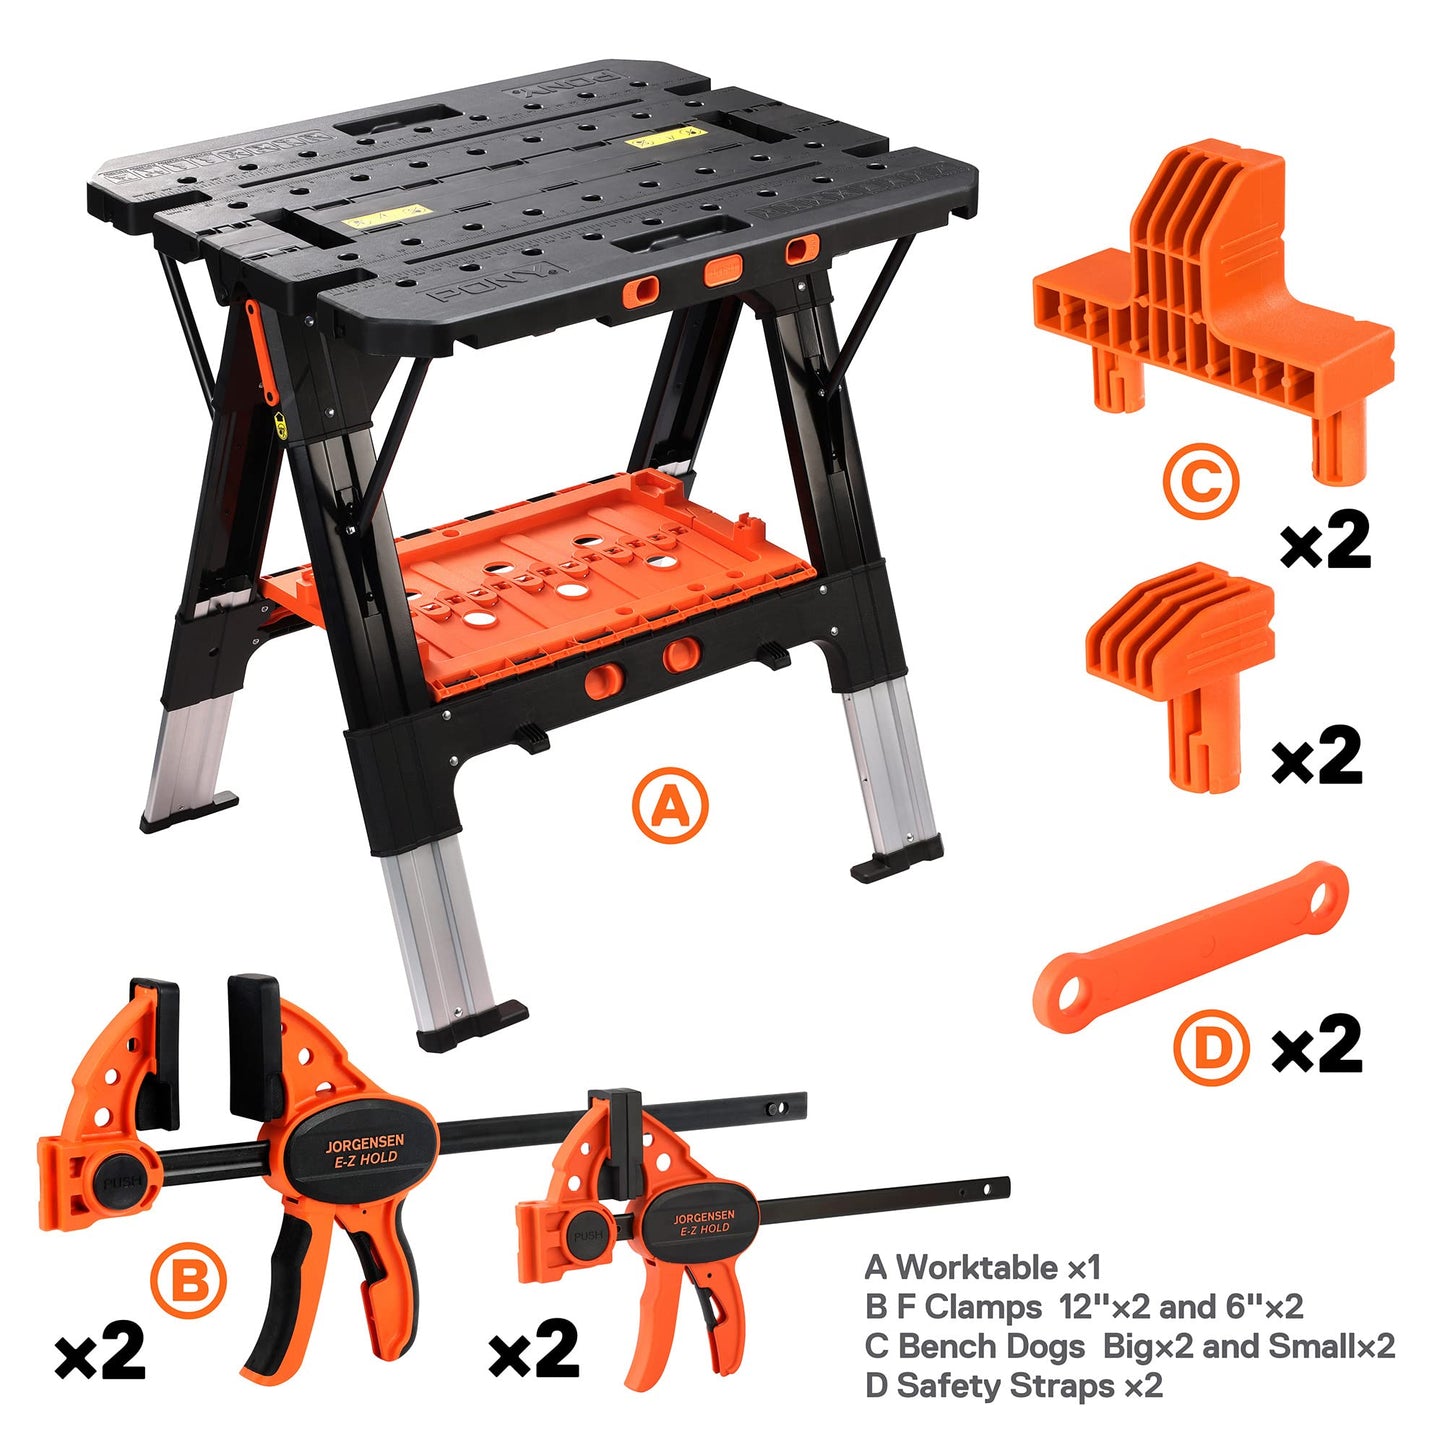 Pony Portable Folding Work Table, 2-in-1 as Sawhorse & Workbench, Load Capacity 1000 lbs-Sawhorse & 500 lbs-Workbench, 31” W×25” D×25”-32”H, with